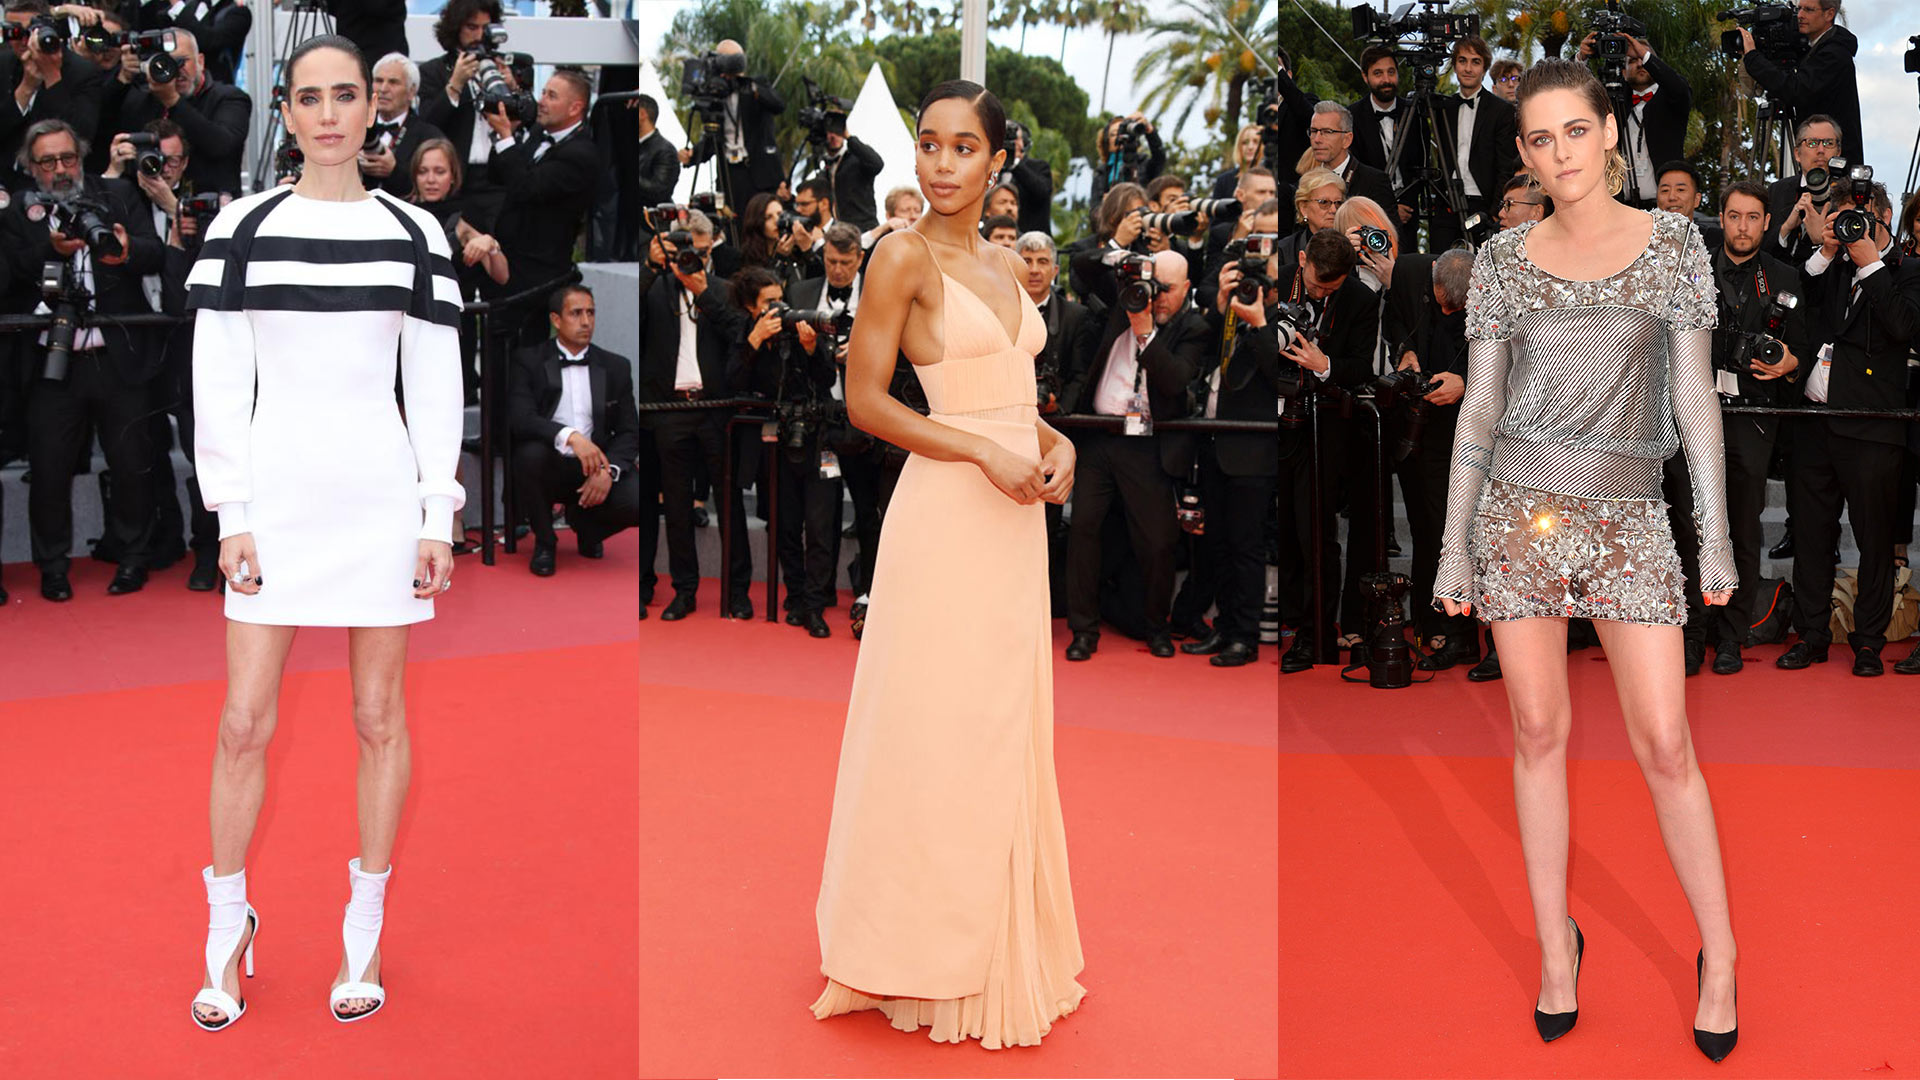 The Best Dressed Stars at the 2019 Cannes Film Festival